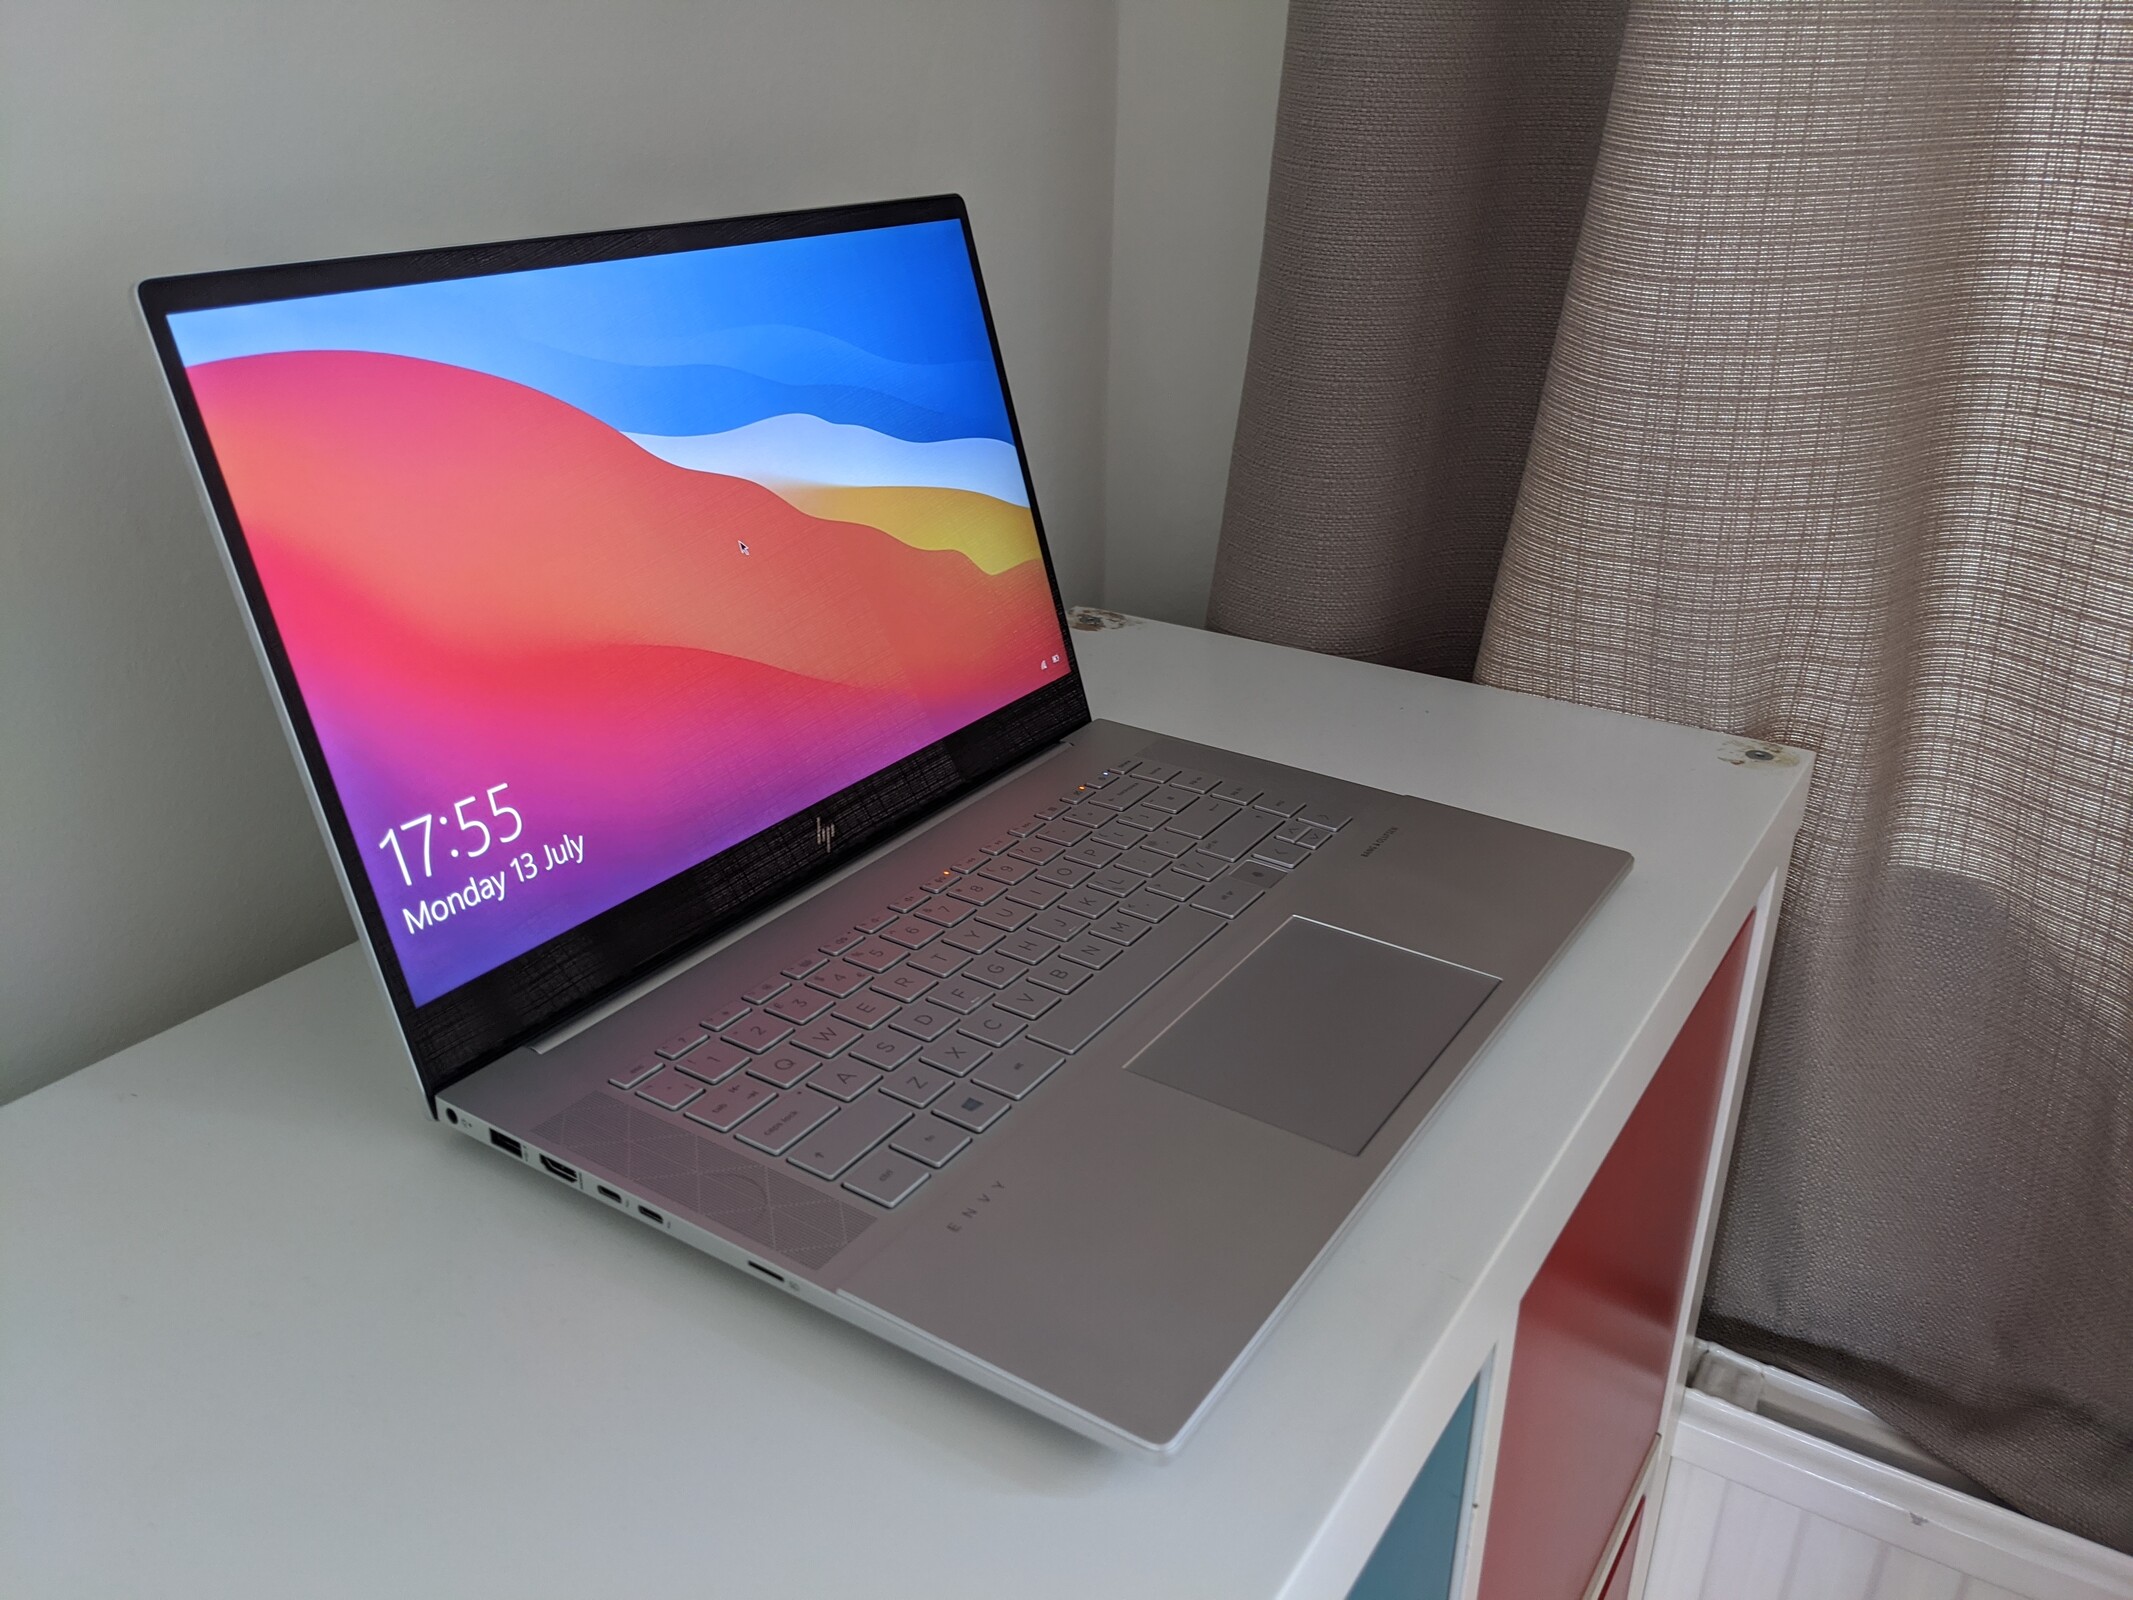 HP Envy 15 2020 First impressions with HP's new multimedia laptop